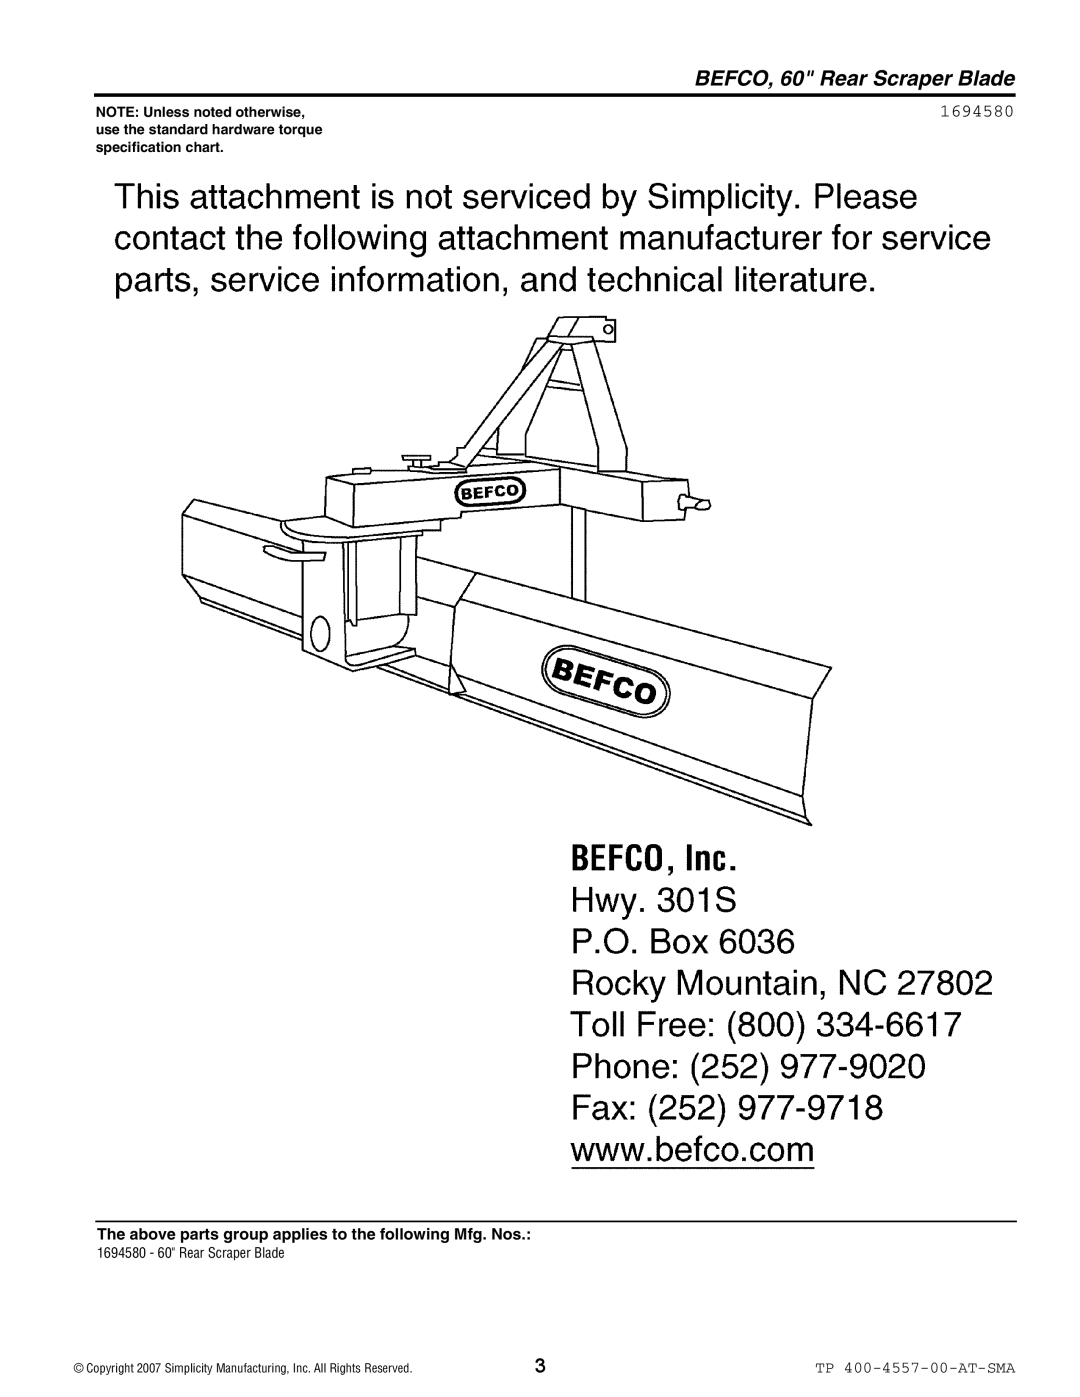 Snapper 1694580 manual BEFCO, 60 Rear Scraper Blade, NOTE Unless noted otherwise, use the standard hardware torque 